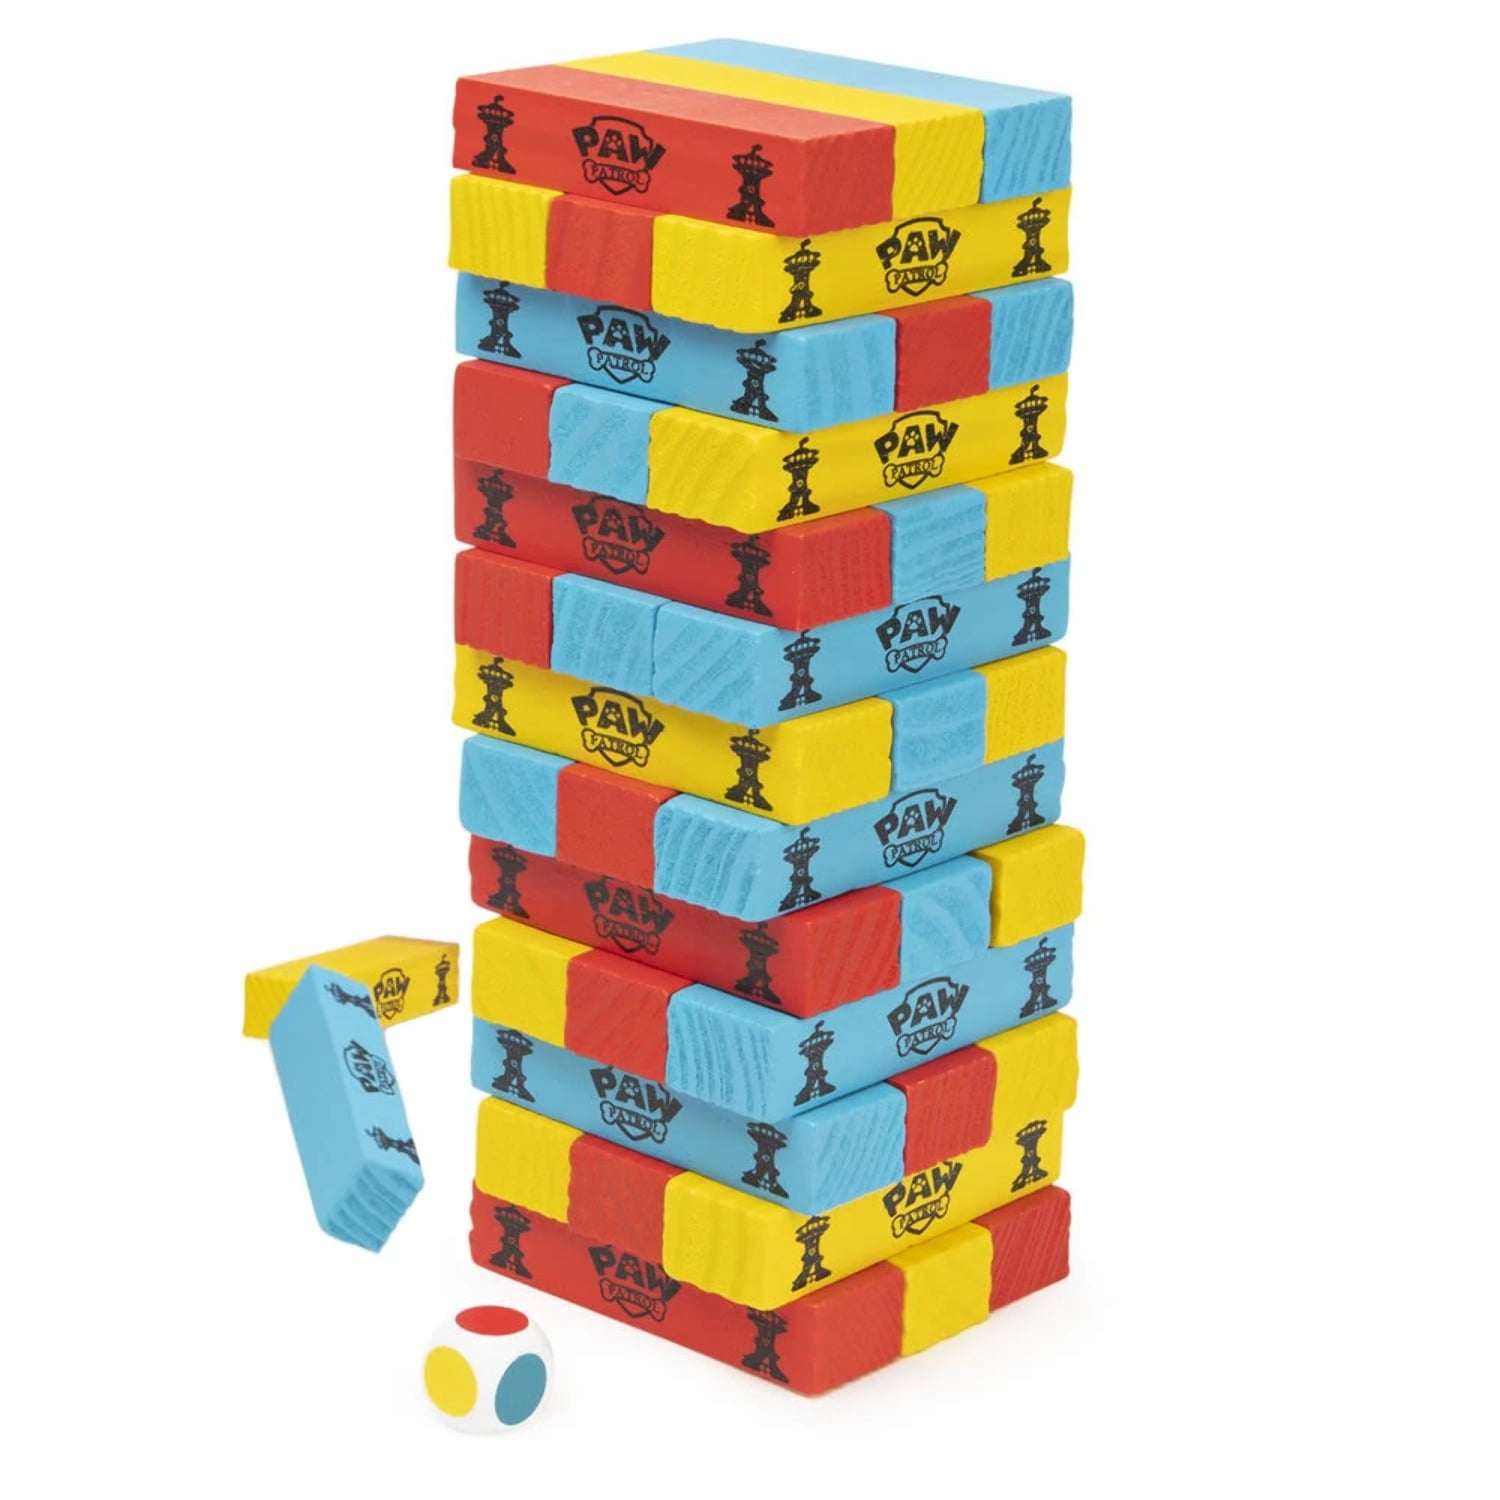 TOP BRIGHT Colored Stacking Game Wooden Building Blocks Timber Tower Tumbling Toys for Kids Ages 3-8 with 51 Pieces 